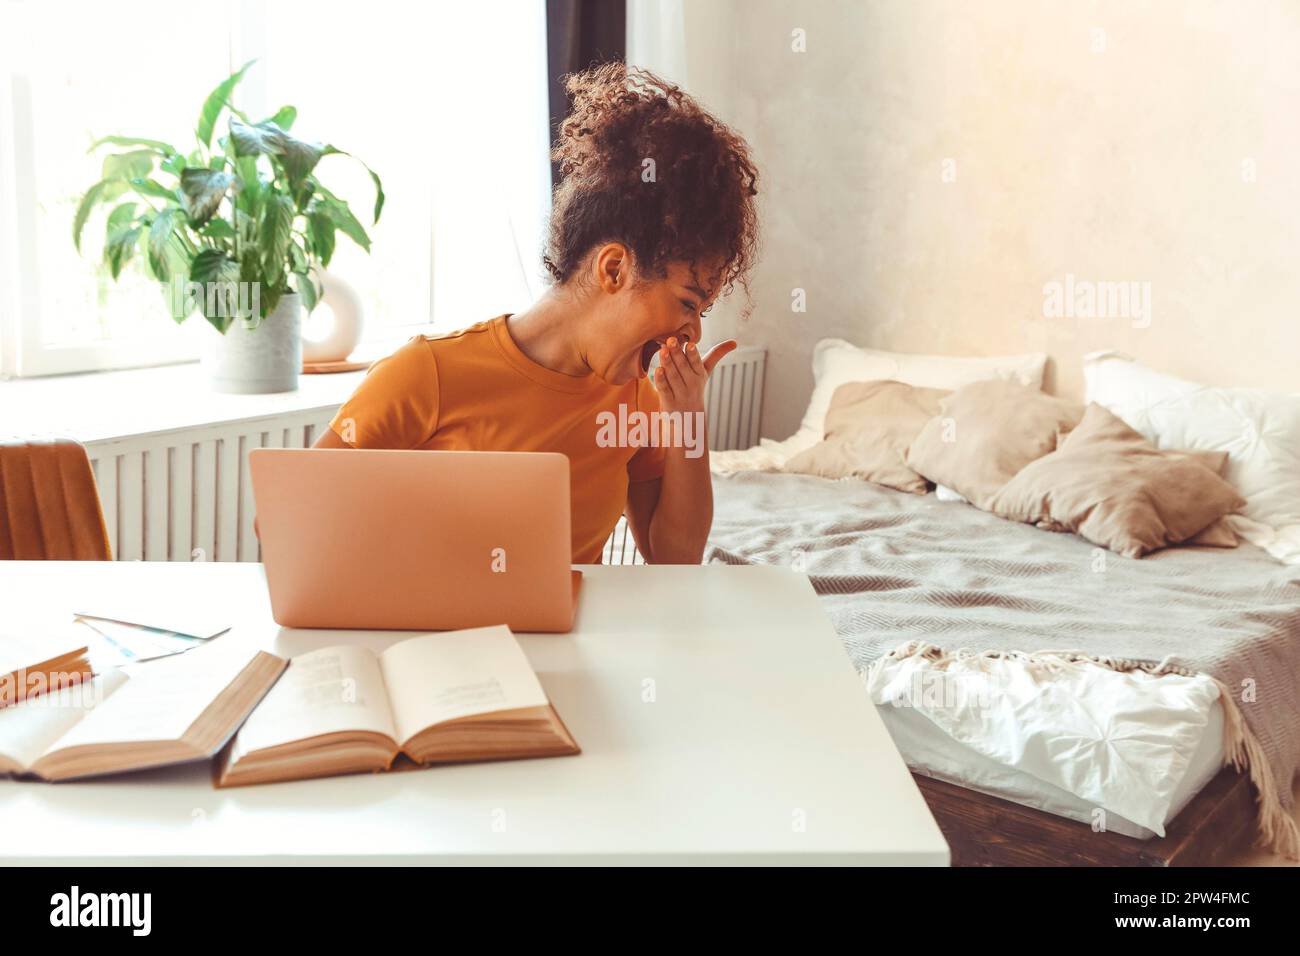 Tired flustrated African descent young girl sitting at desk in front of laptop while yawning cover mouth with hand not having interest enthusiasm for Stock Photo